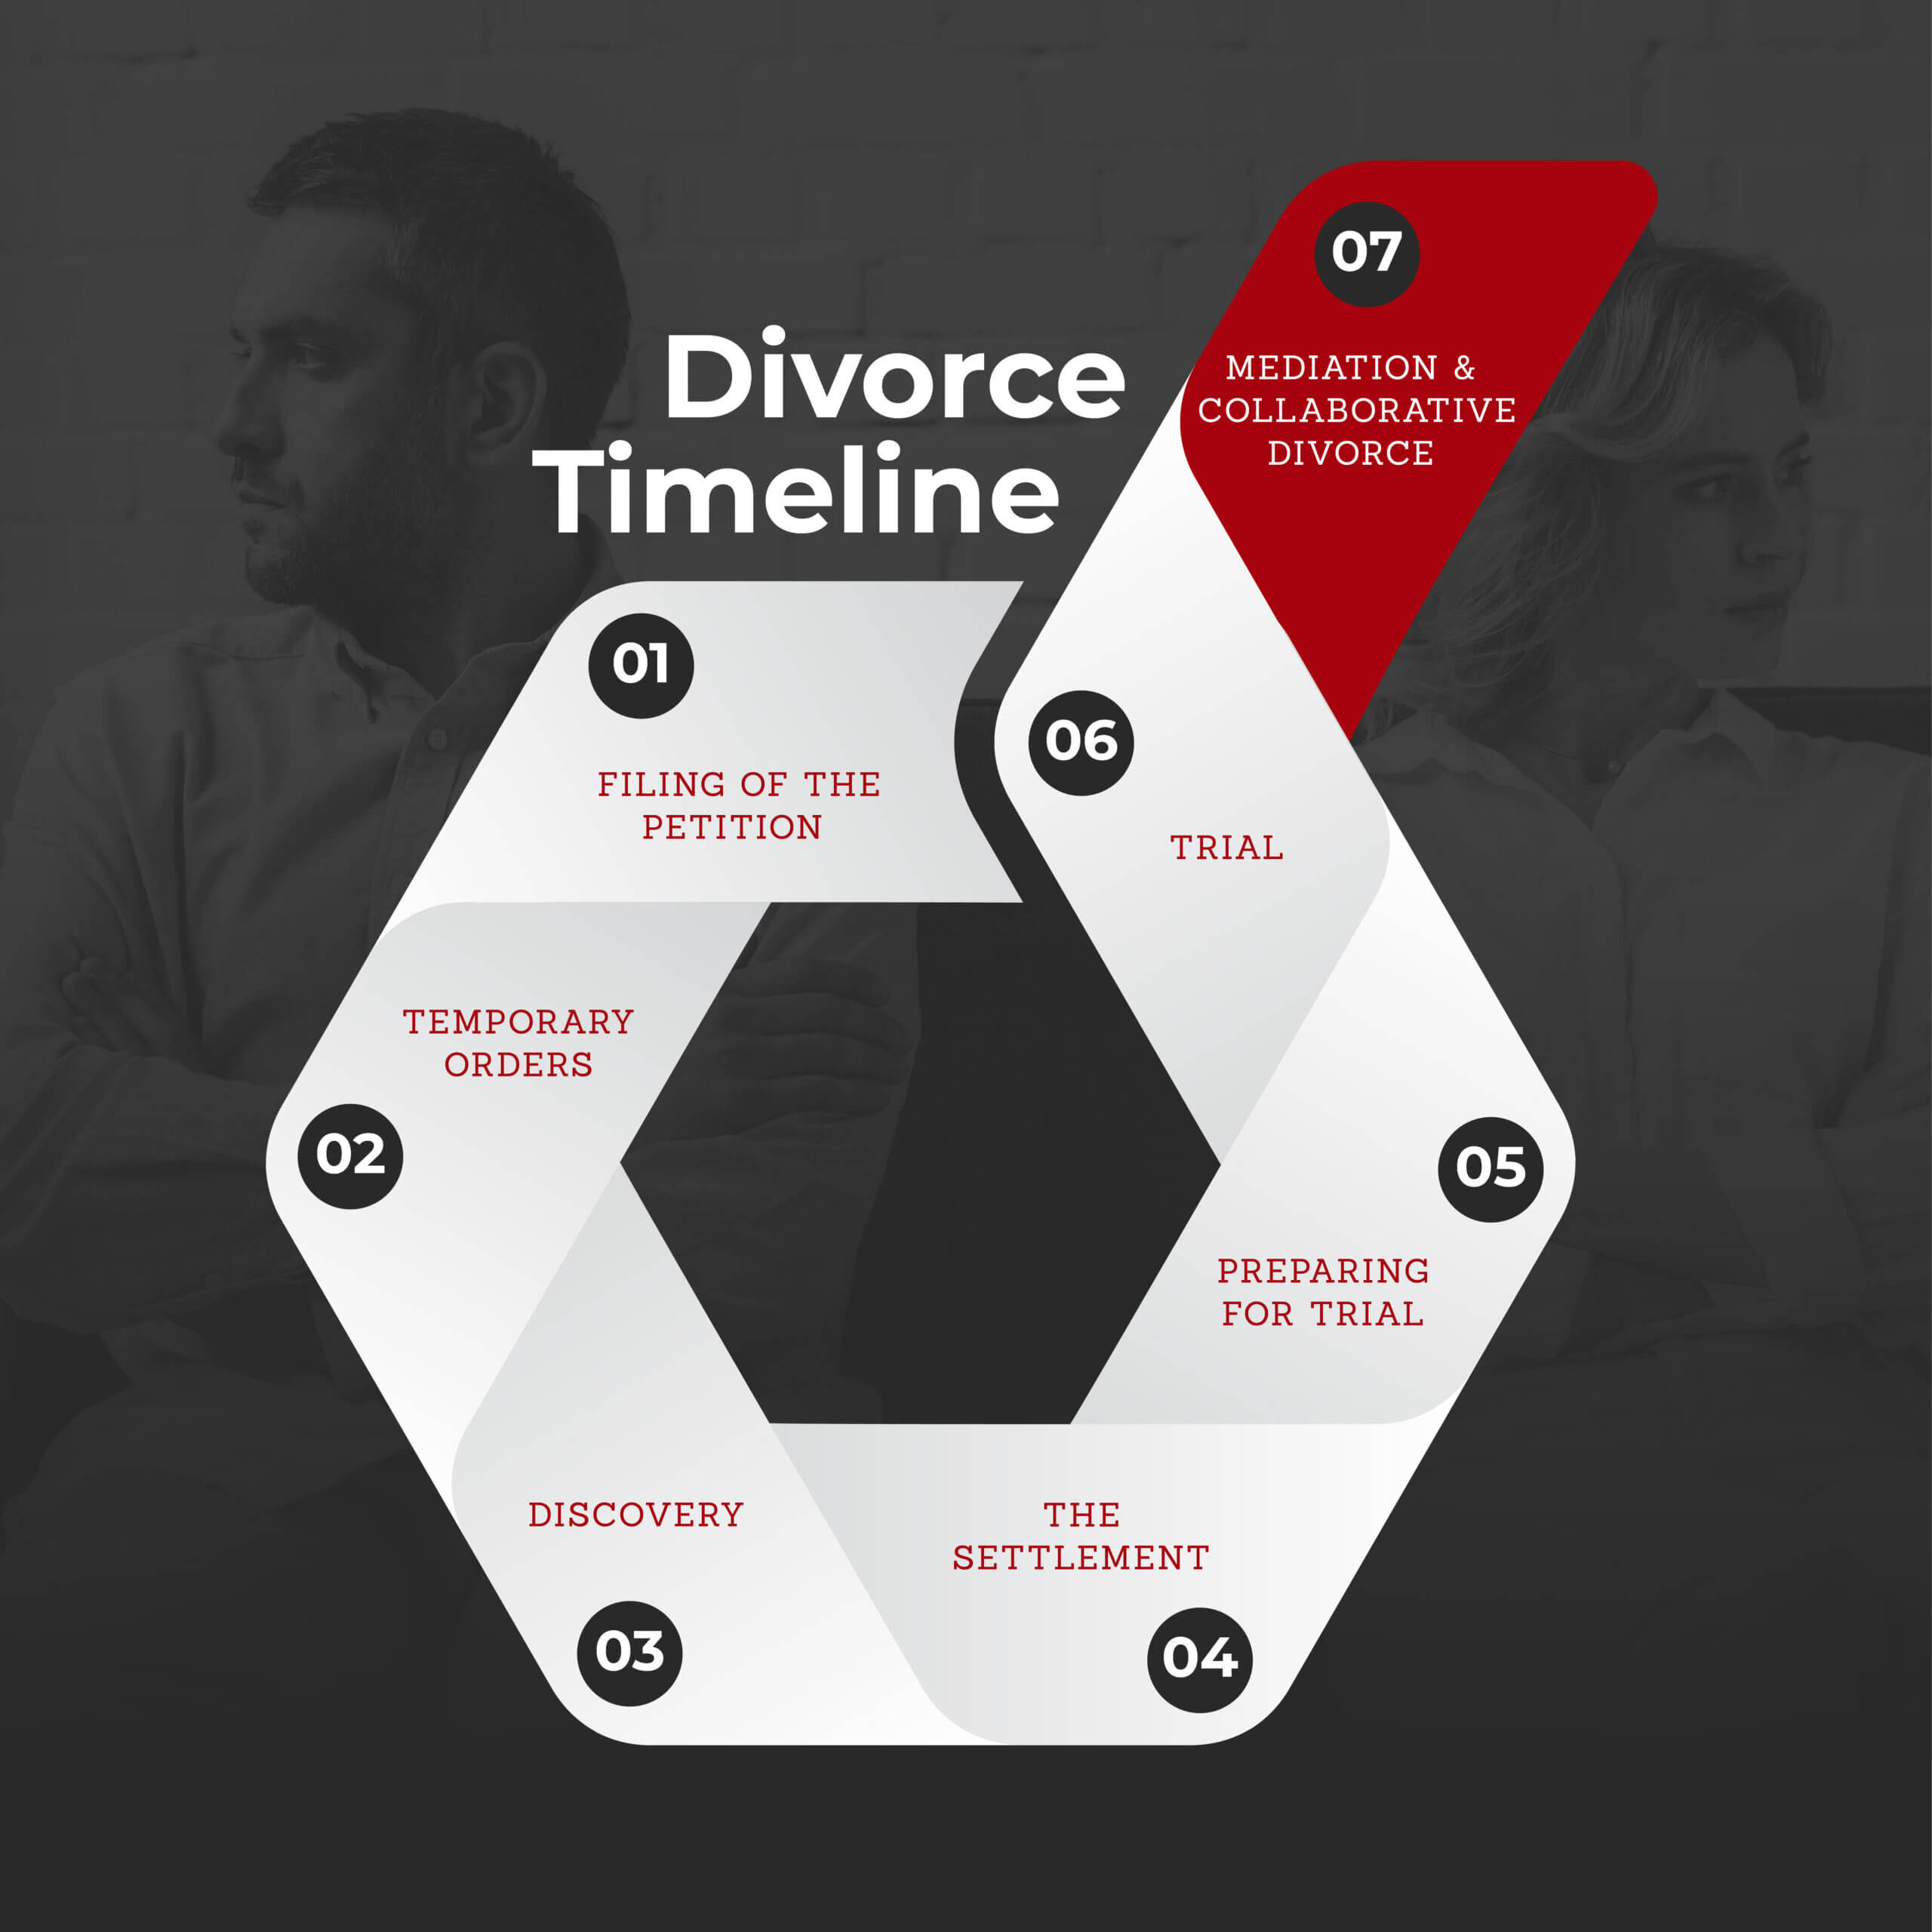 Divorce Timeline graphic that shows the 7 steps